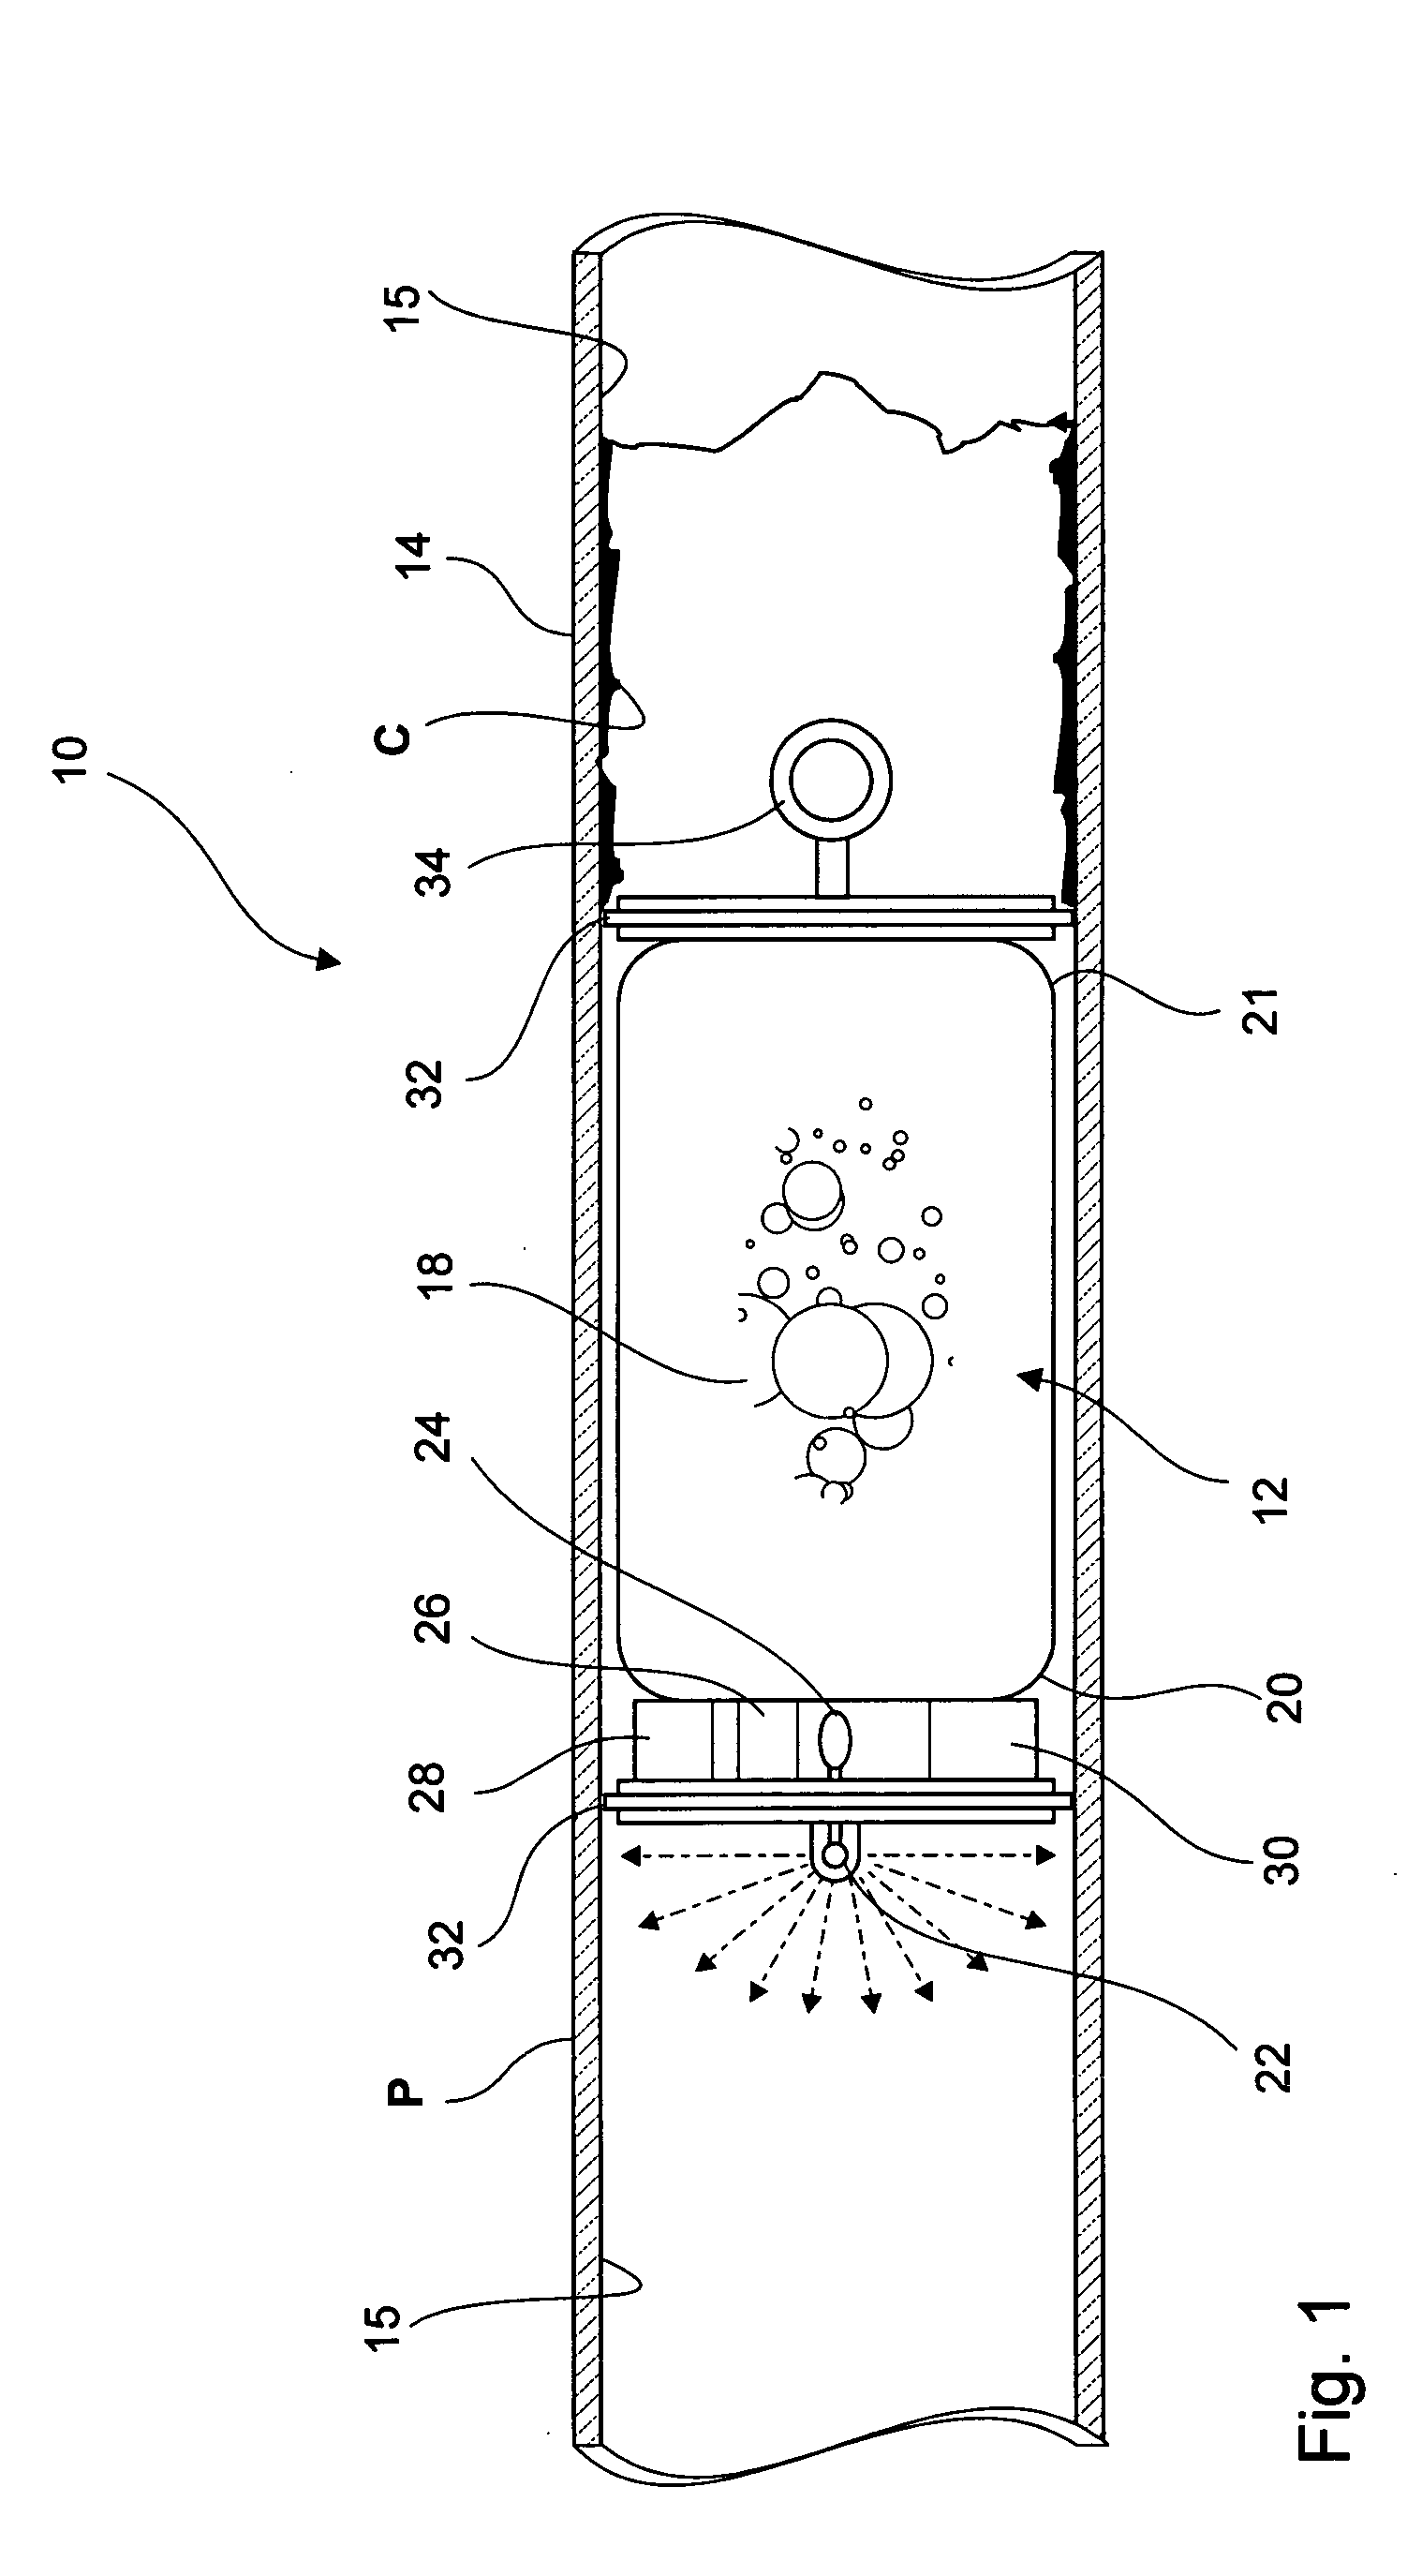 Device and method for transporting and delivering liquid chemical to inside natural gas pipeline